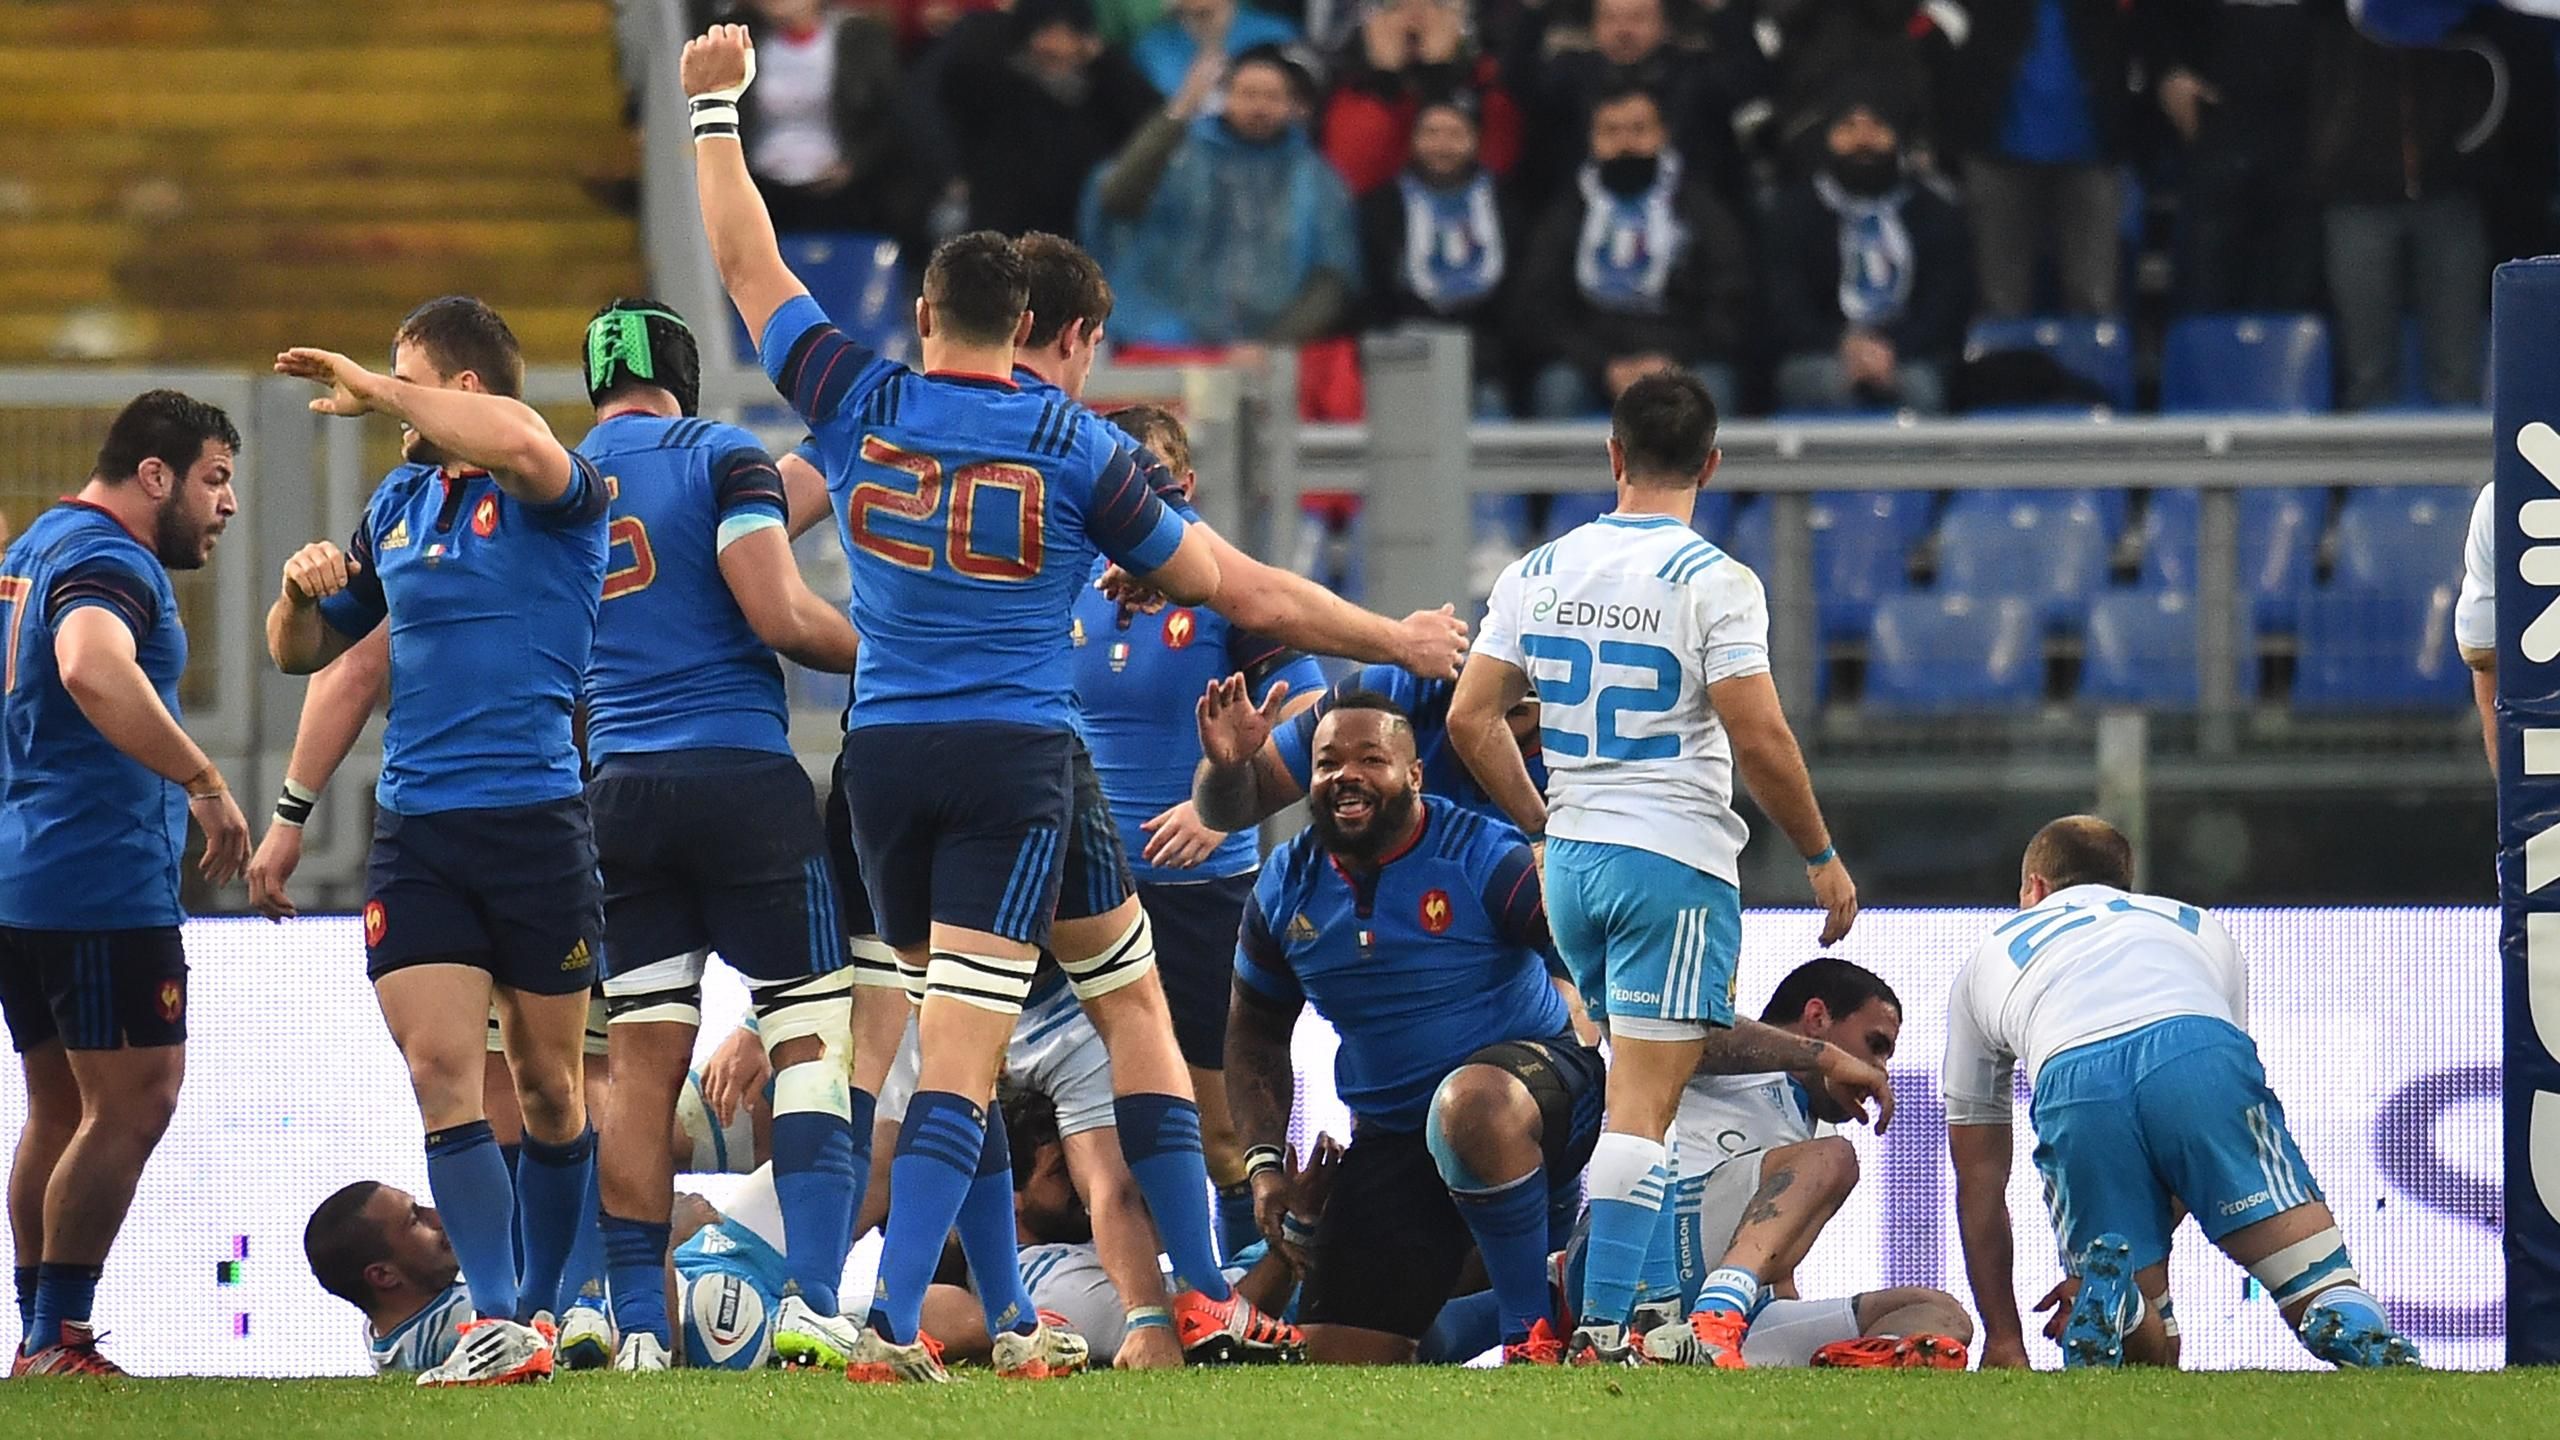 Mondial Rugby: Match France - Italie en direct live streaming